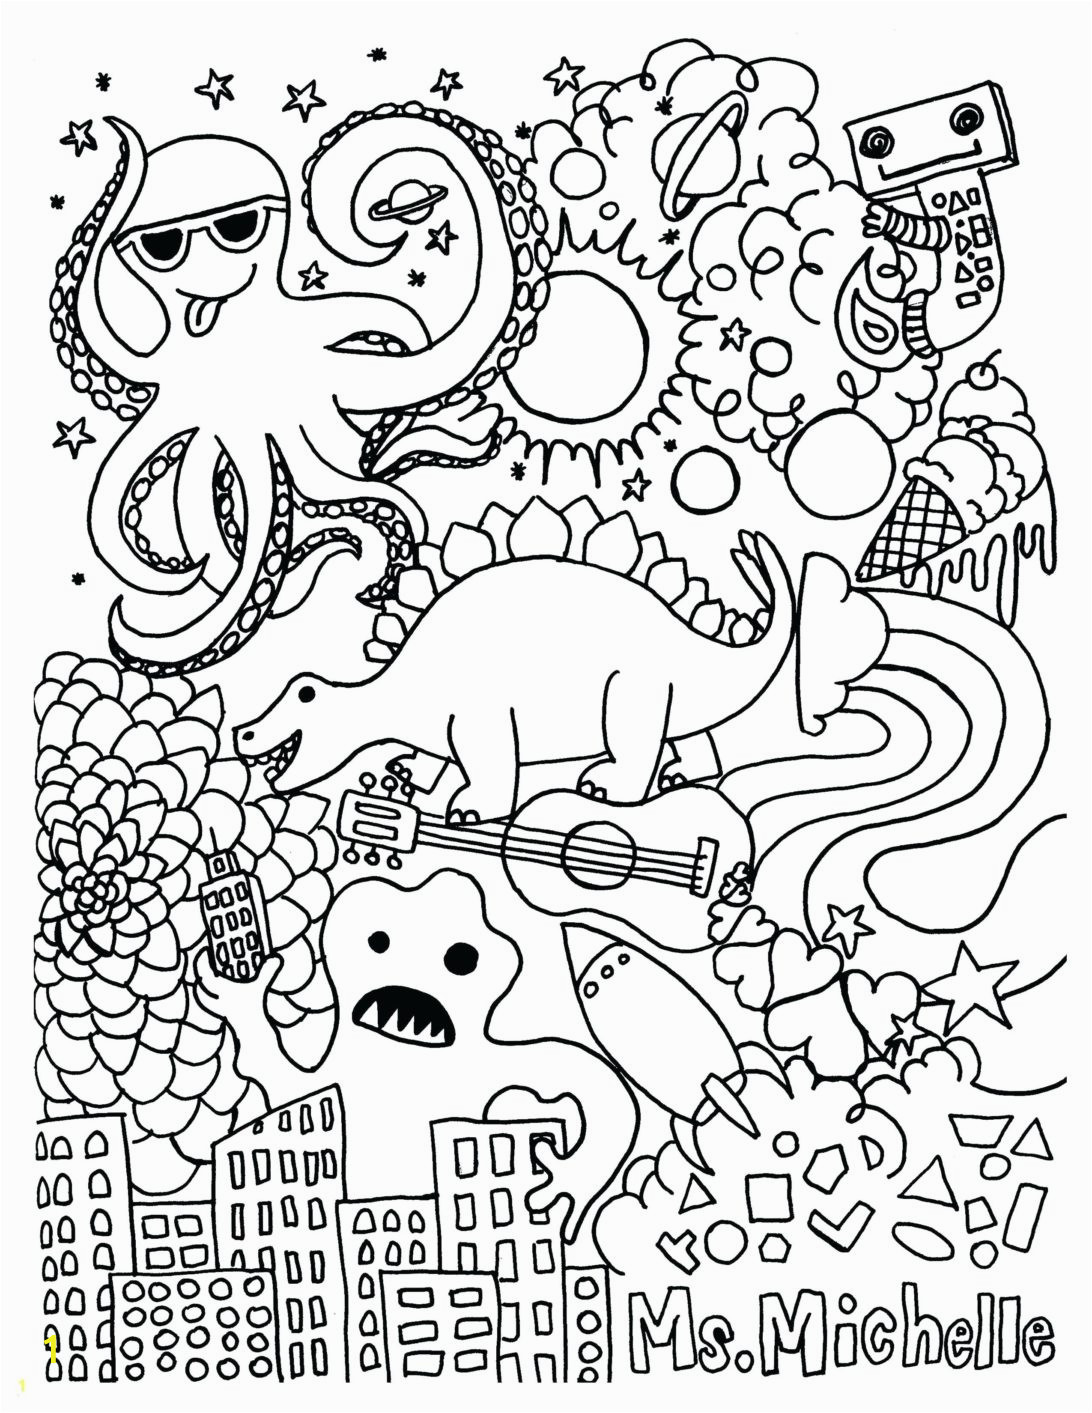 Ultra Beast Pokemon Coloring Page 60 Most Perfect Free Printable Baby Shower Coloring Pages